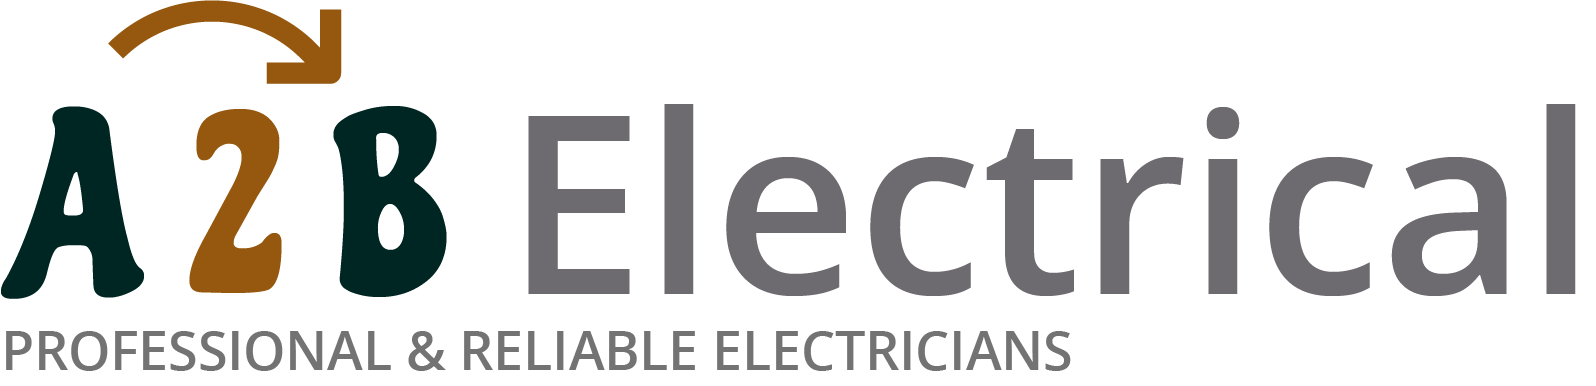 If you have electrical wiring problems in Tewkesbury, we can provide an electrician to have a look for you. 